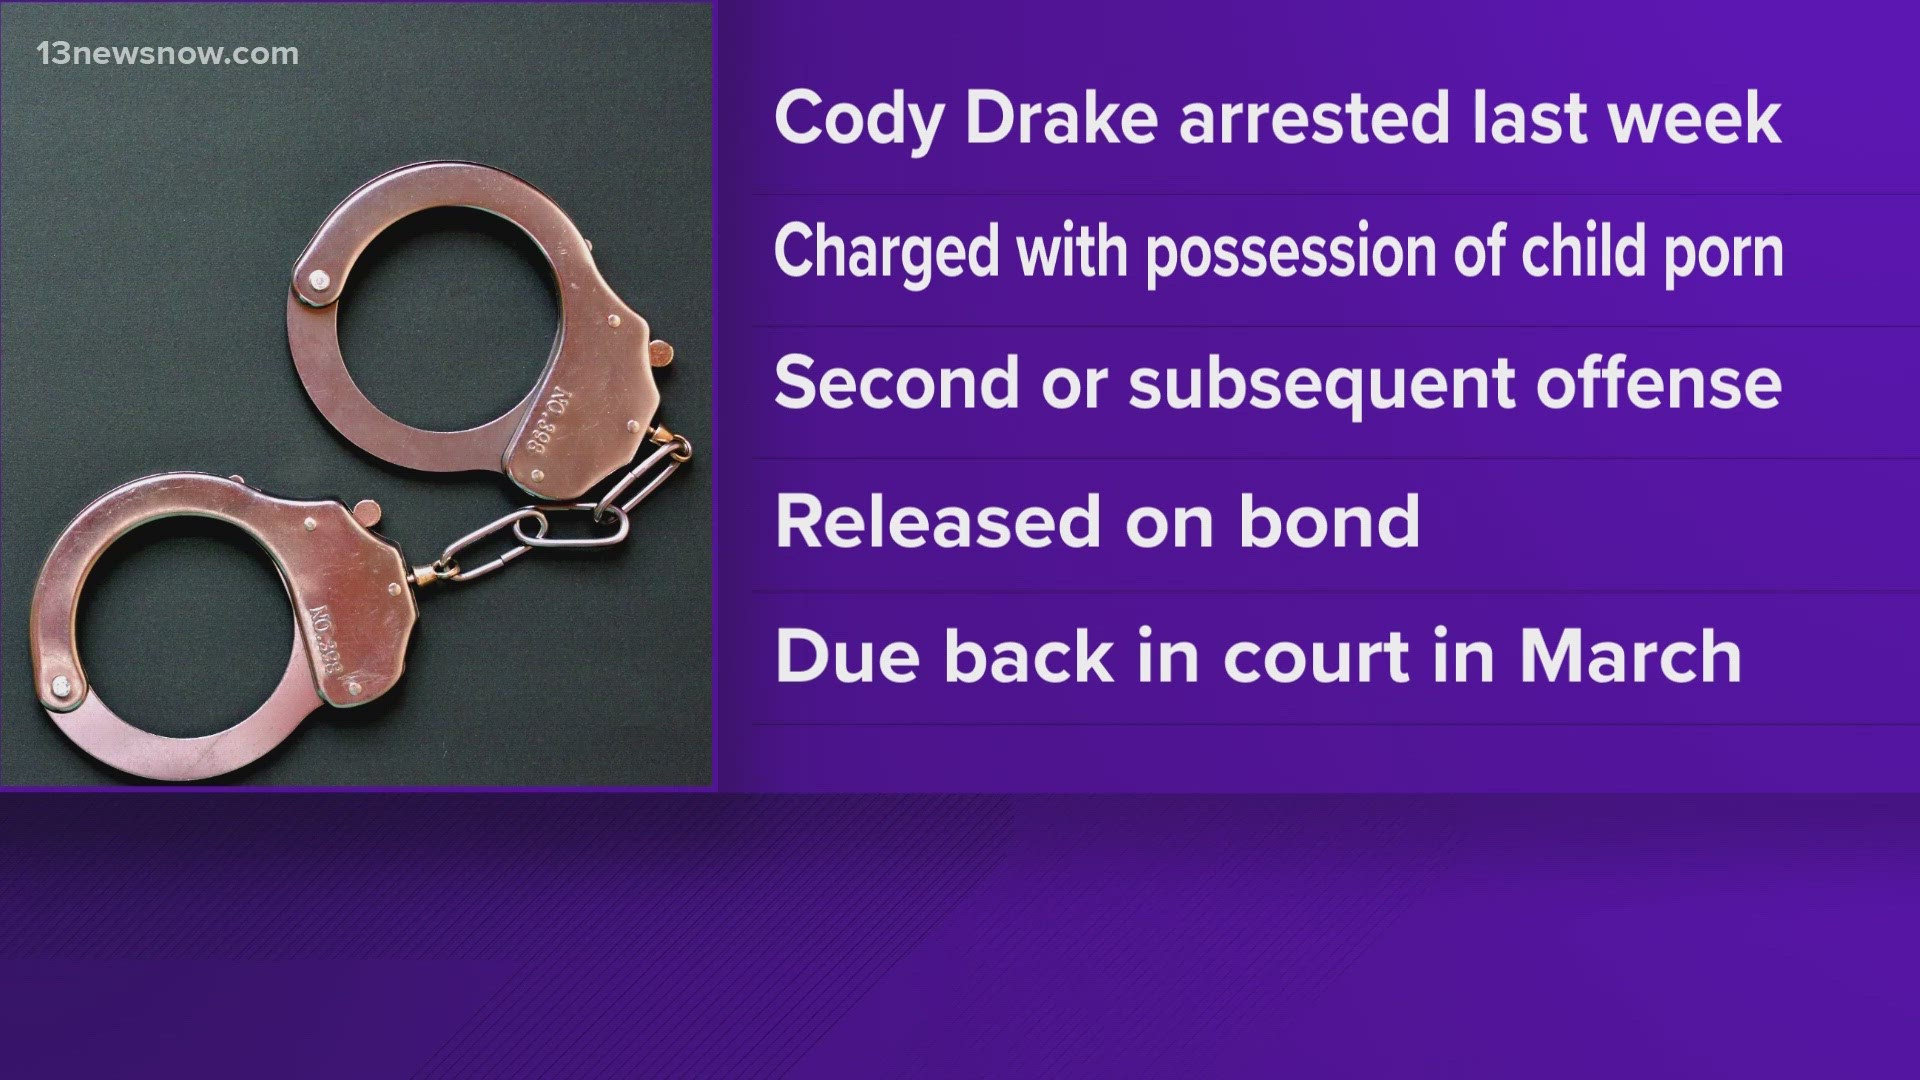 Cody Drake, 30, was charged with three counts of possession of child pornography.